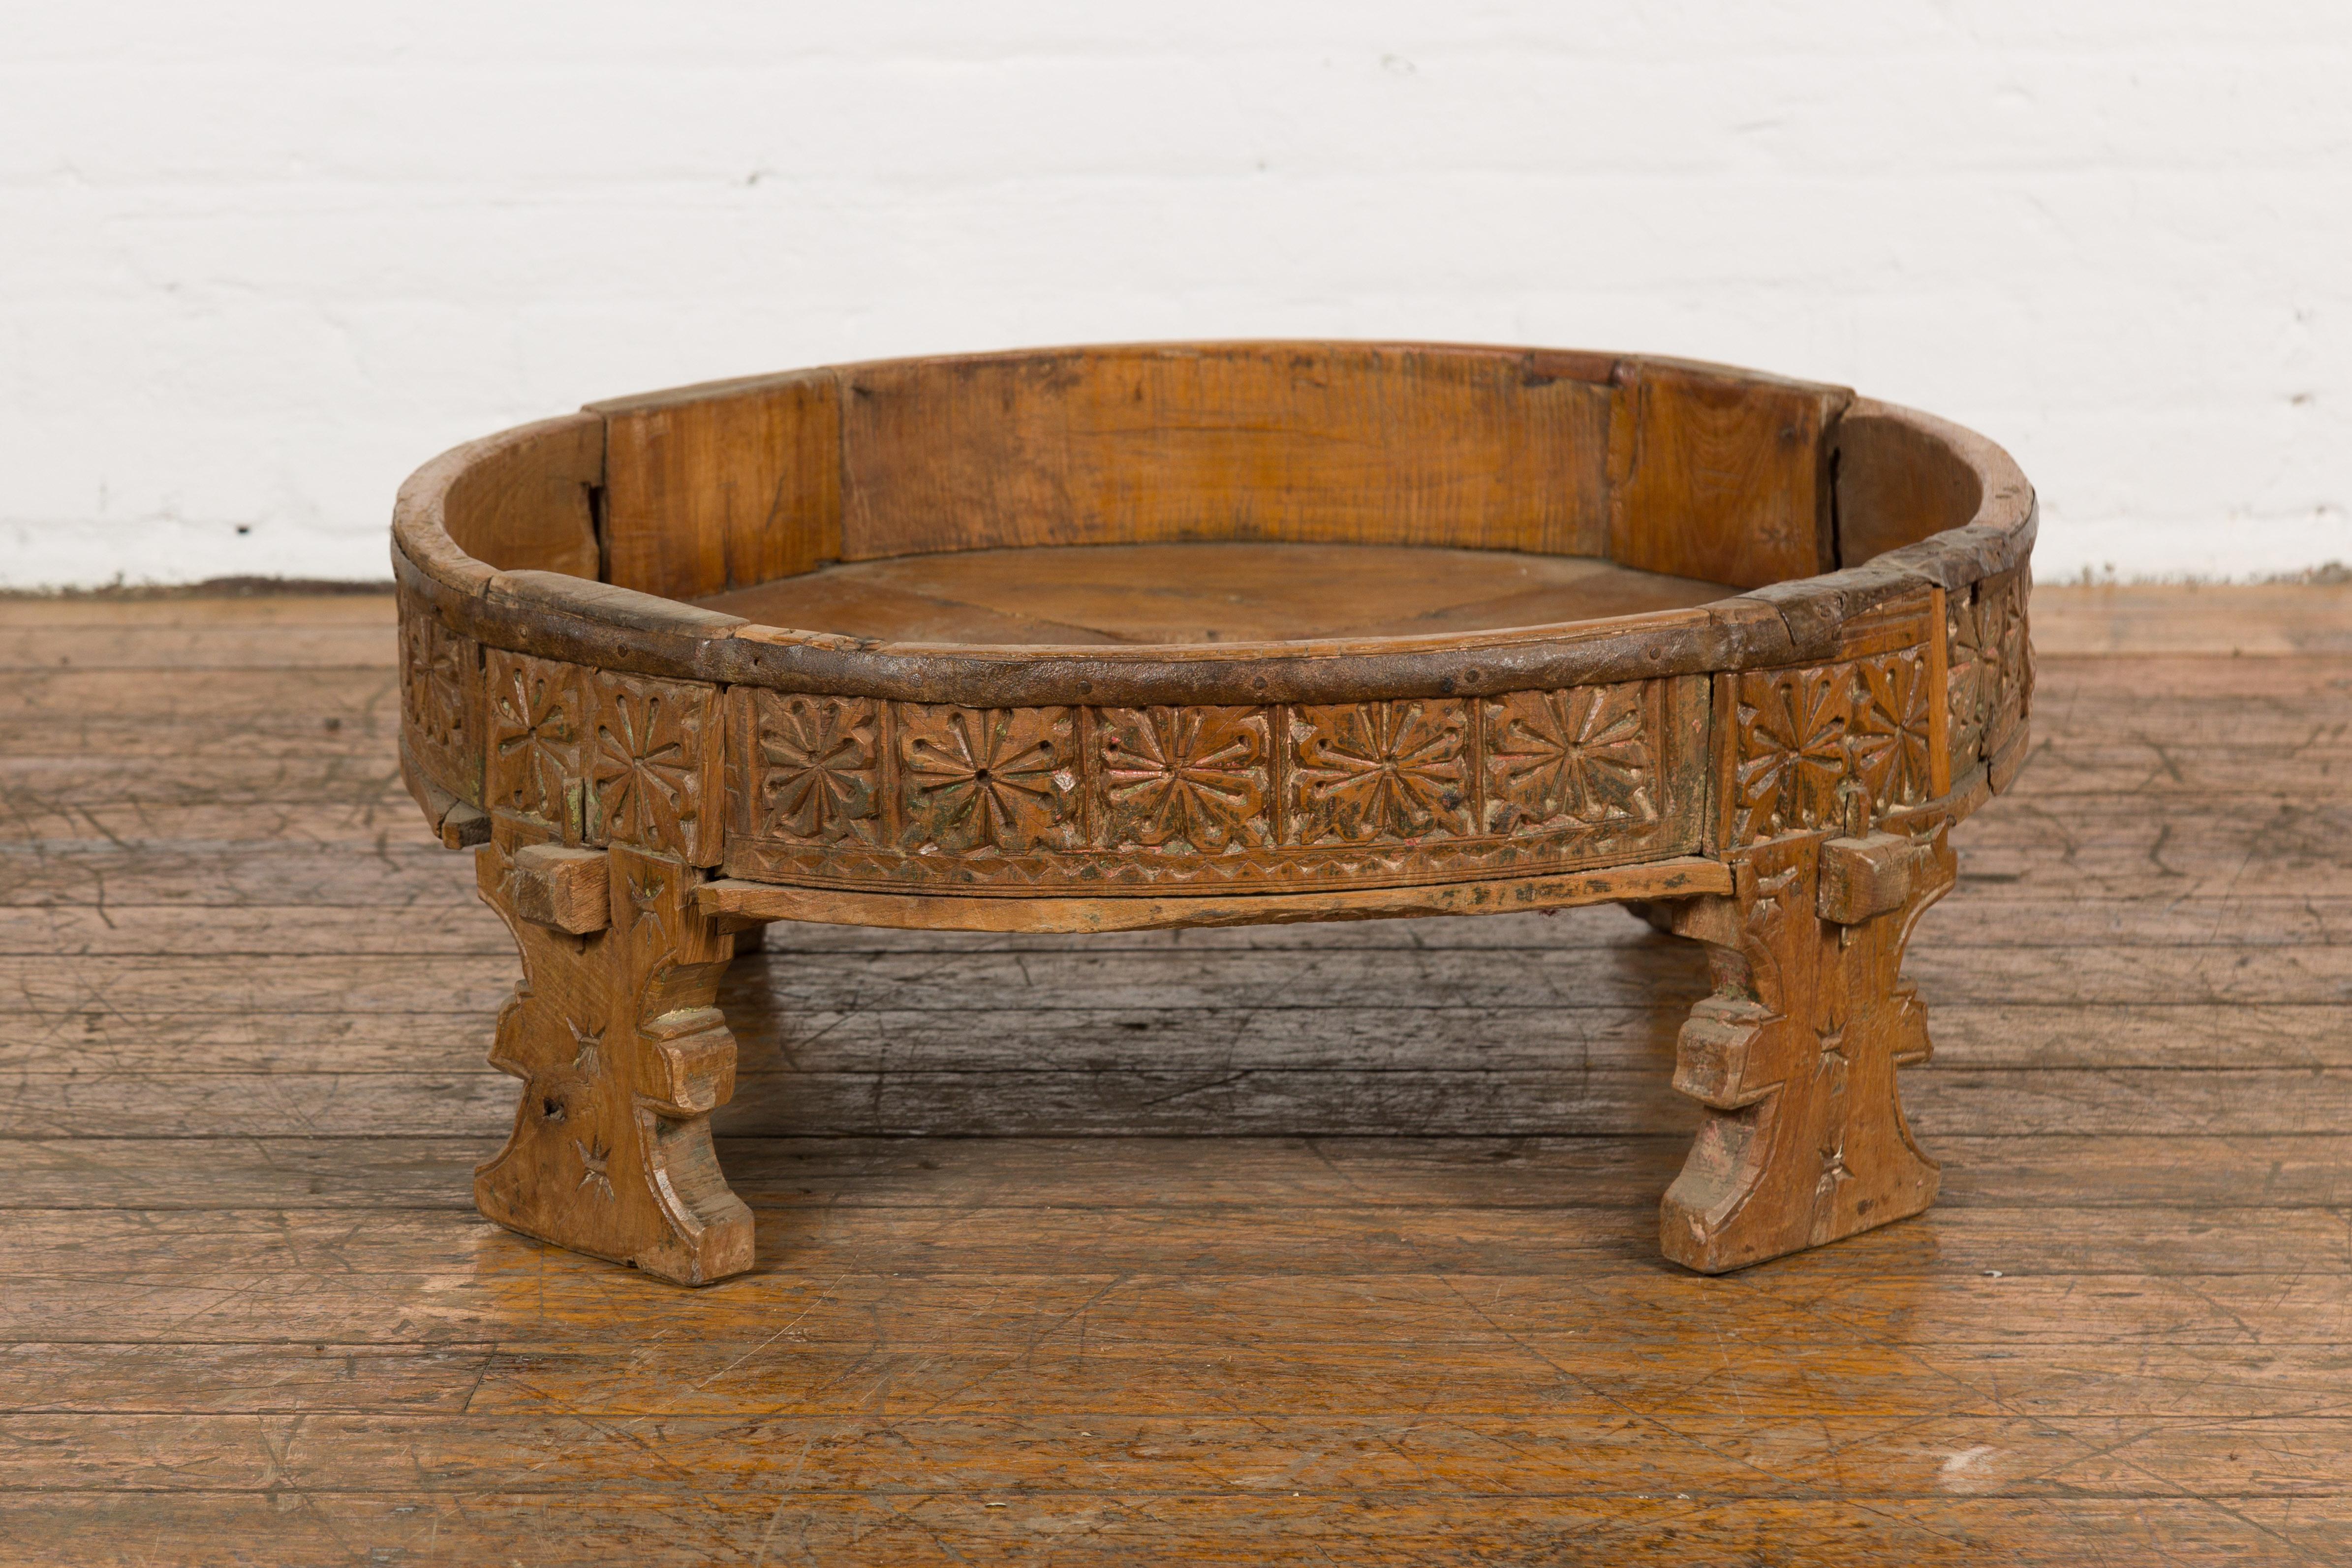 Indian Tribal 1920s Teak Chakki Grinding Table with Geometric Hand-Carved Motifs For Sale 9